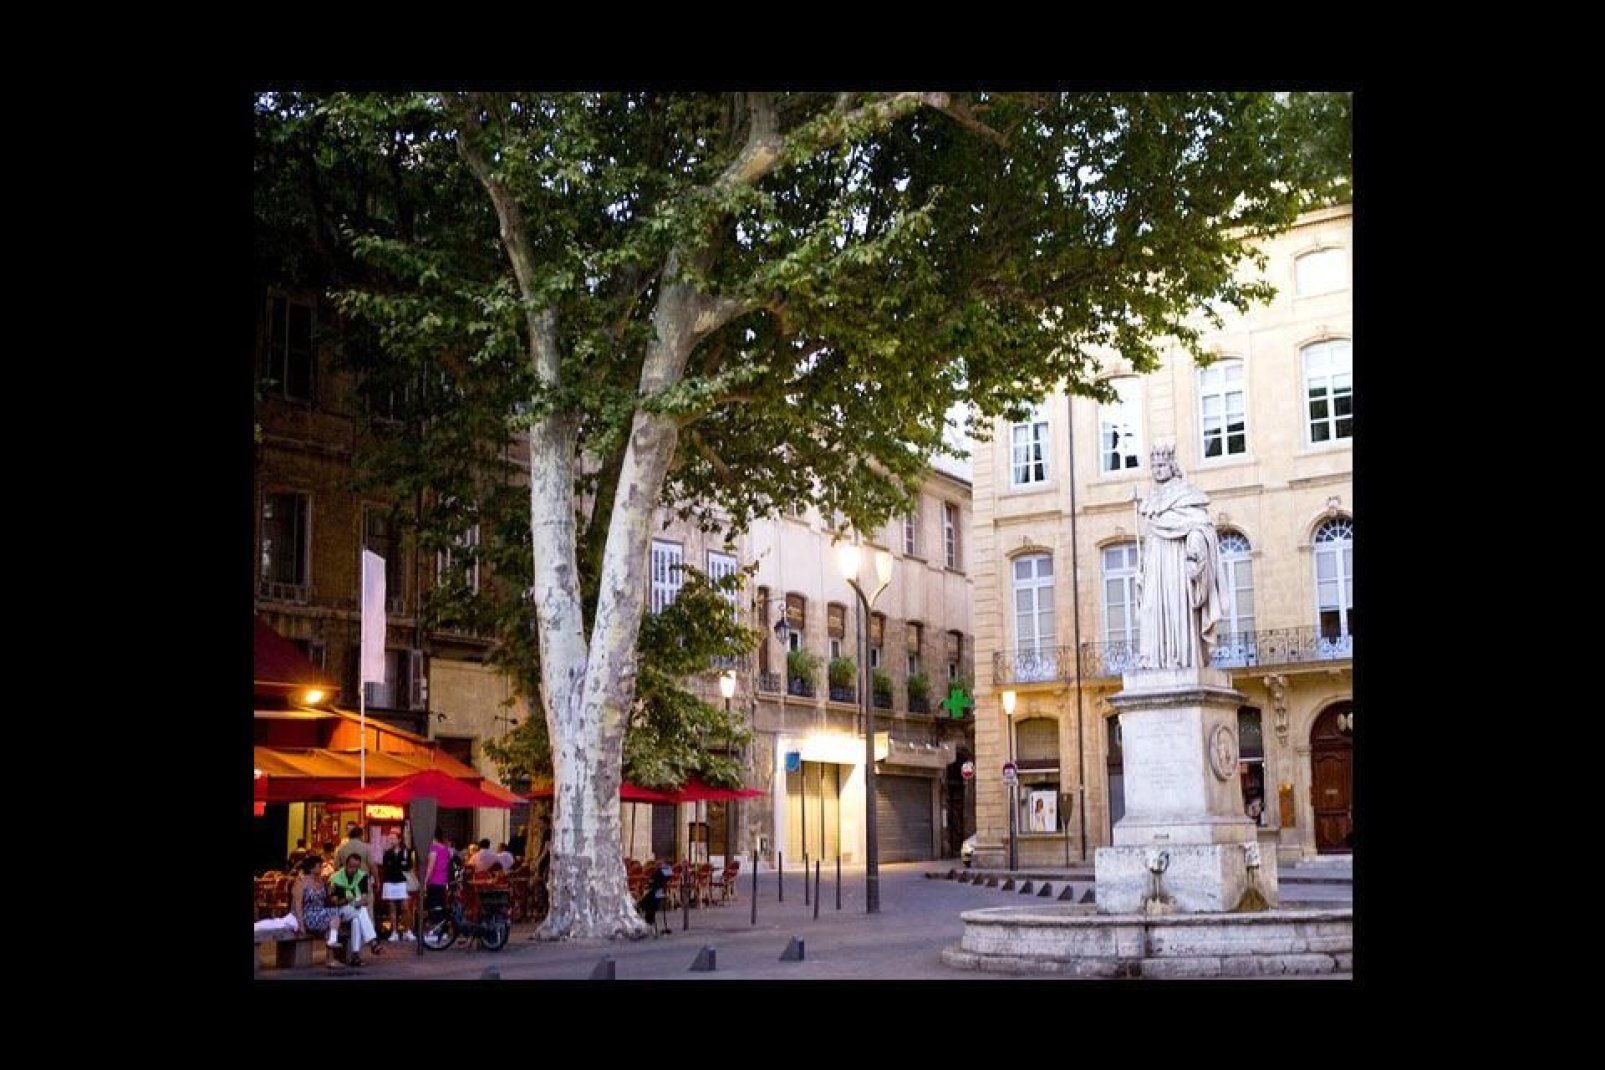 To the east of the Cours Mirabeau stands King René of Anjou, who died in Aix-en-Provence in 1480. The monumental statue was built in 1822 and weighs over 6 tonnes!